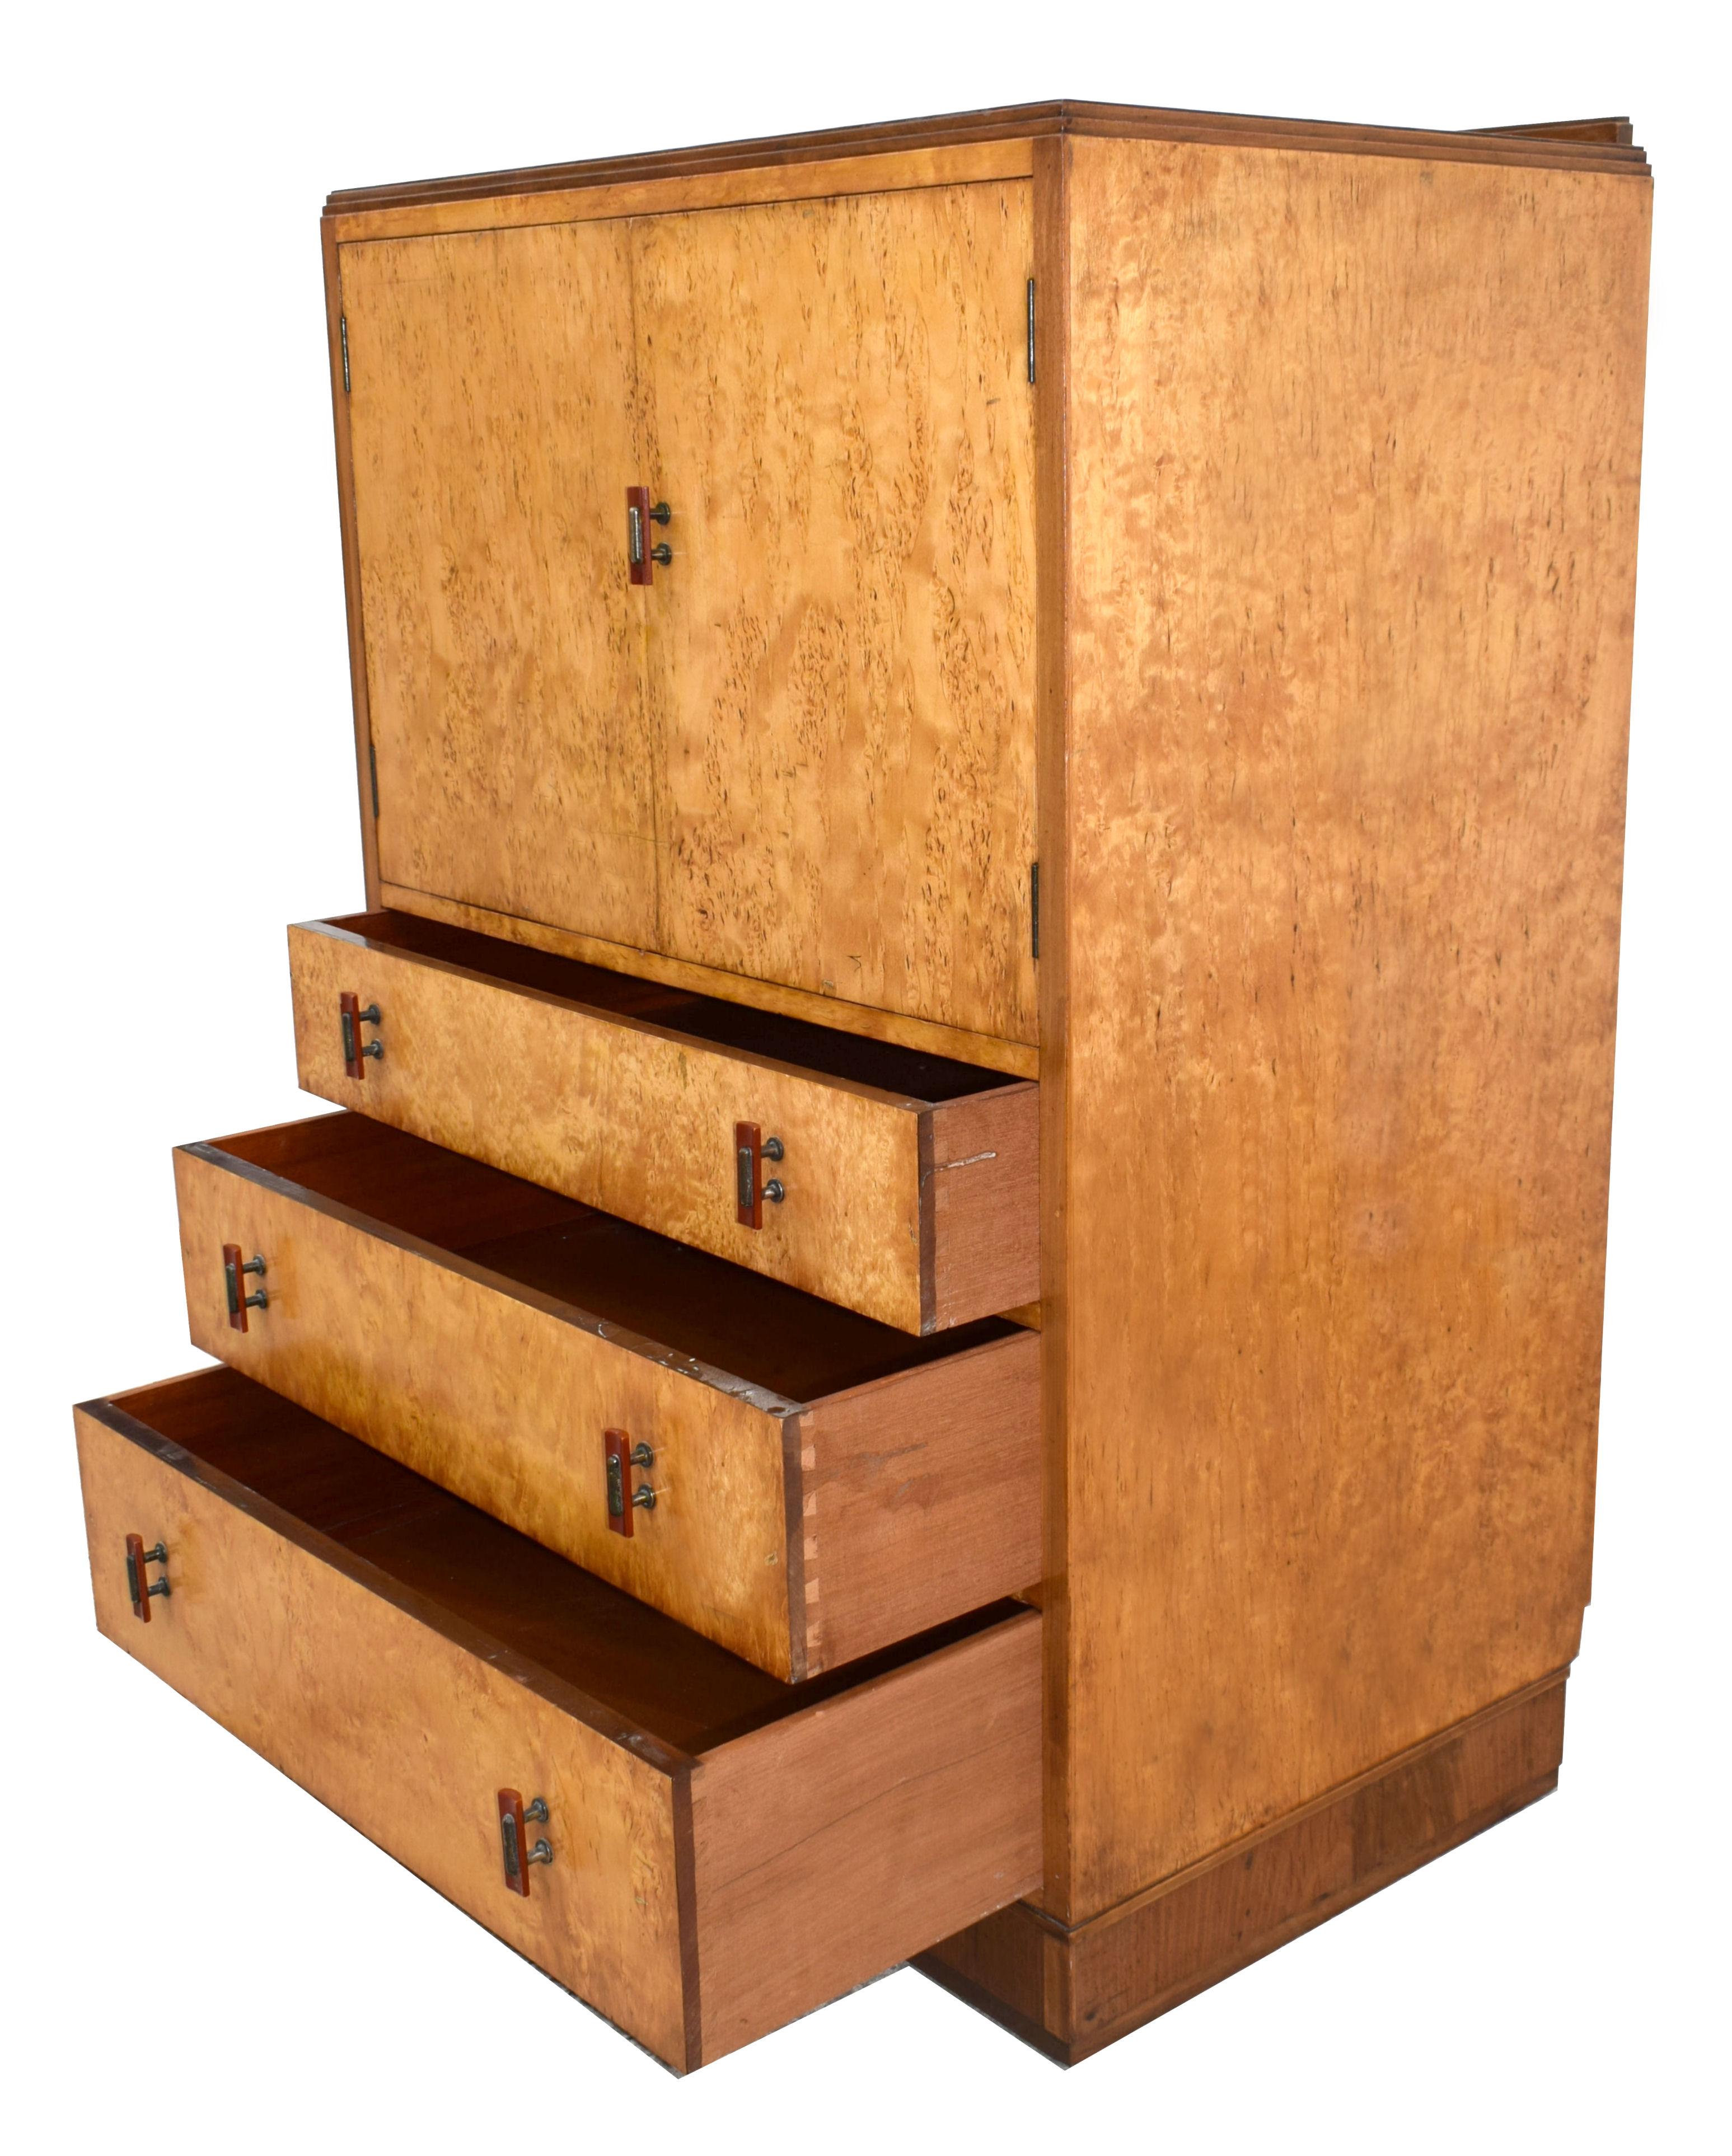 For your consideration is this English Art Deco blonde bird's-eye Maple two-door, three drawer single-piece tallboy, circa 1930 and in excellent original condition. All resting on a Walnut plinth which continues around the piece and contrasts